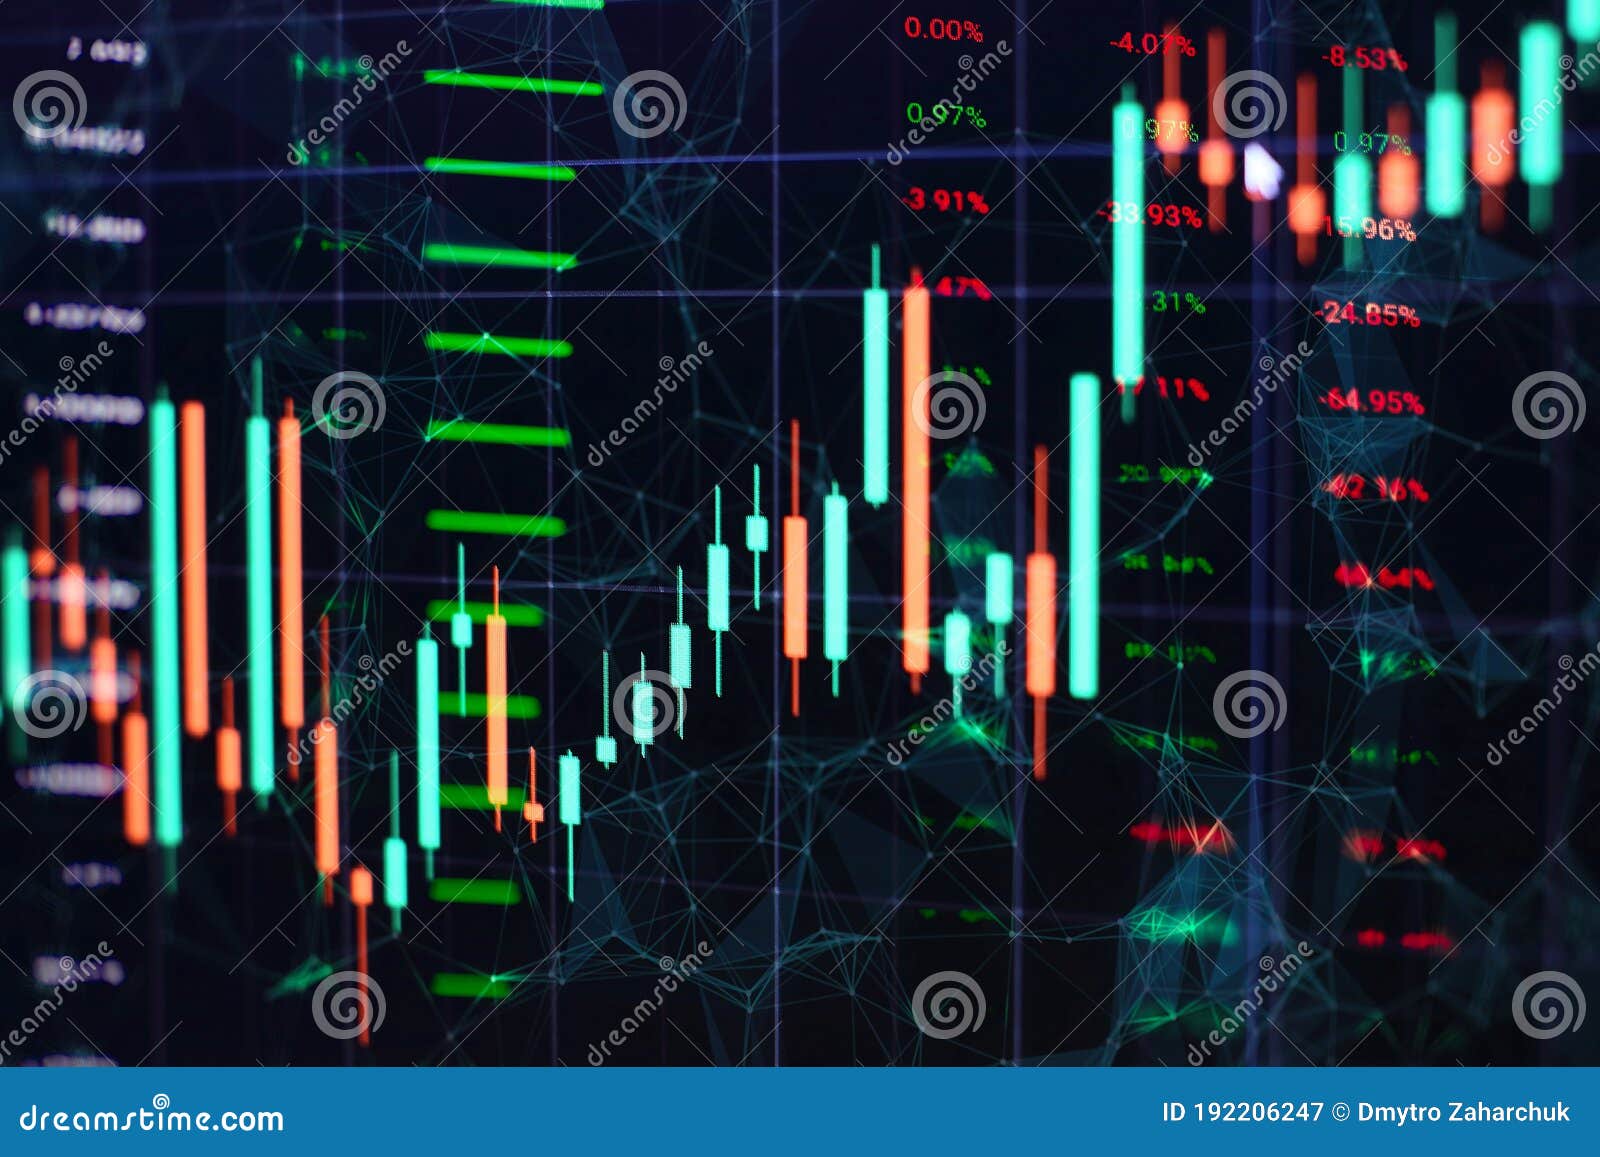 Fundamental And Technical Analysis Concept Abstract Financial Trading Graphs On Monitor Background With Currency Bars And Stock Image Image Of Analysis Economic 192206247